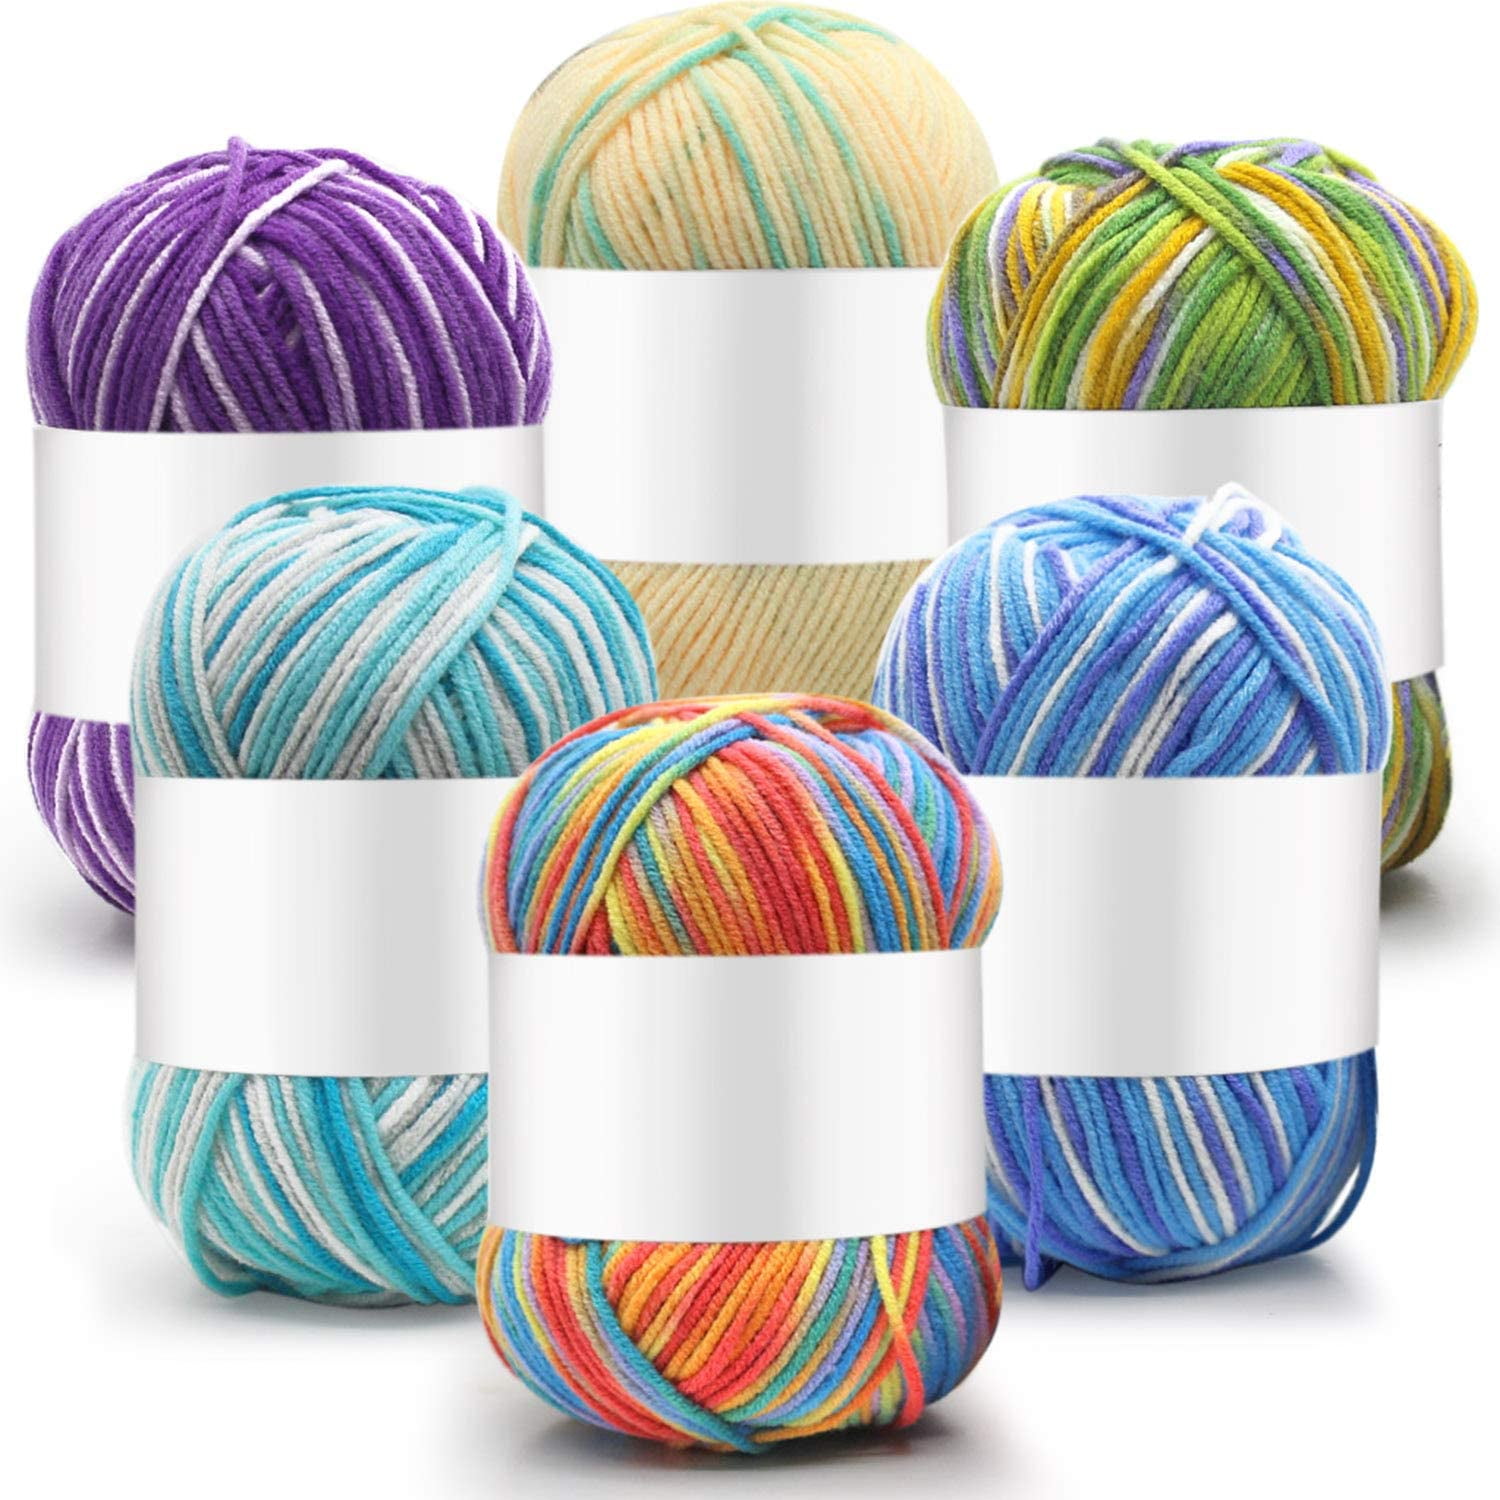 Hicape Multi-Color Crochet Yarn Set for Crocheting, Knitting Yarn Soft  Cotton Yarn, 25g Each, 525 Yards Total, Great for Mini Knitting and Crochet